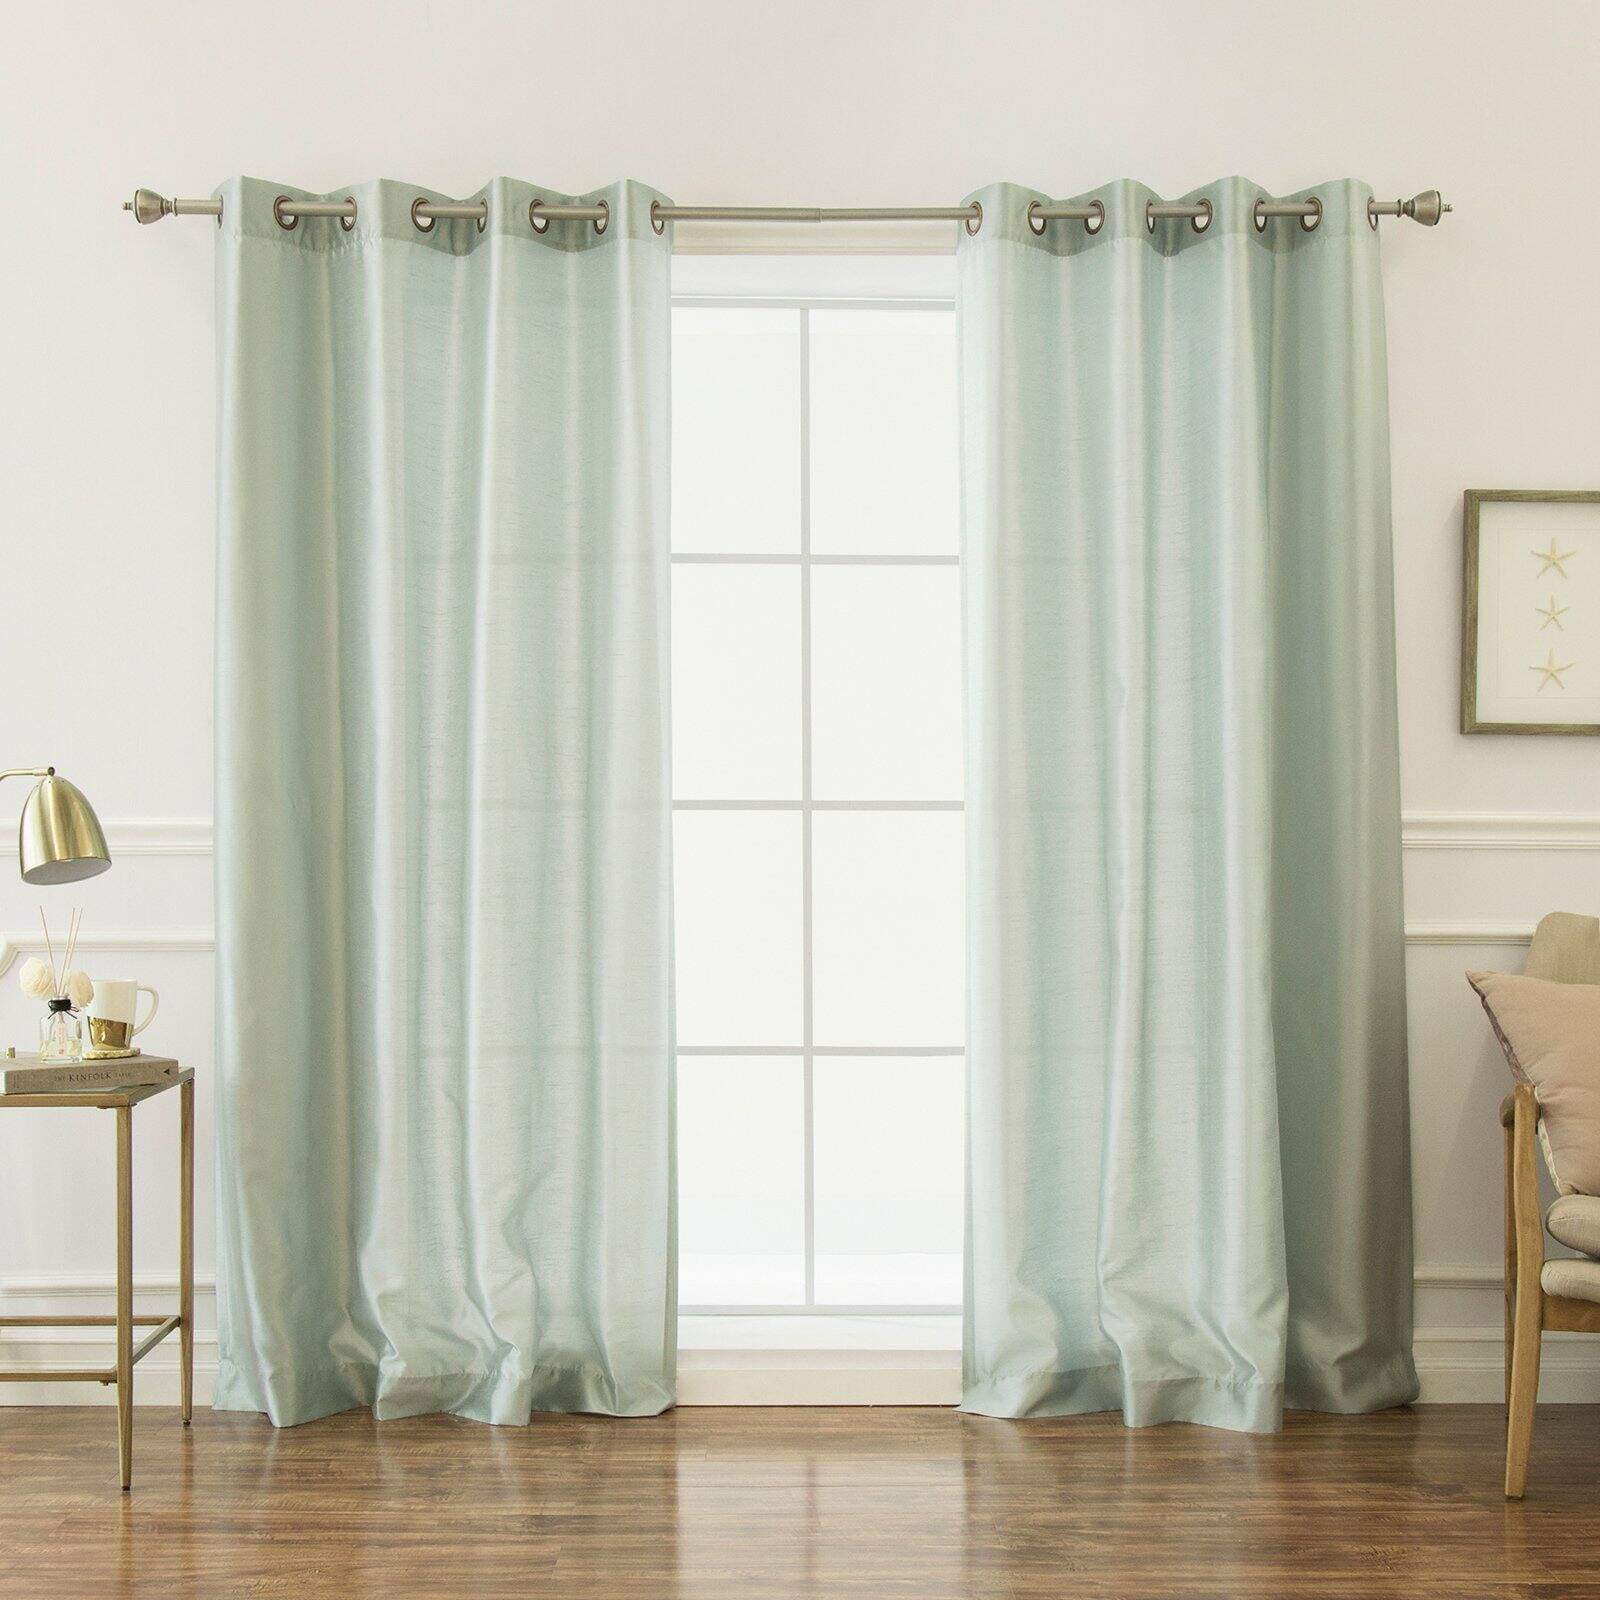 B Smith Origami Grommet 84-Inch Window Curtain Panel in Blue Set Of 2 